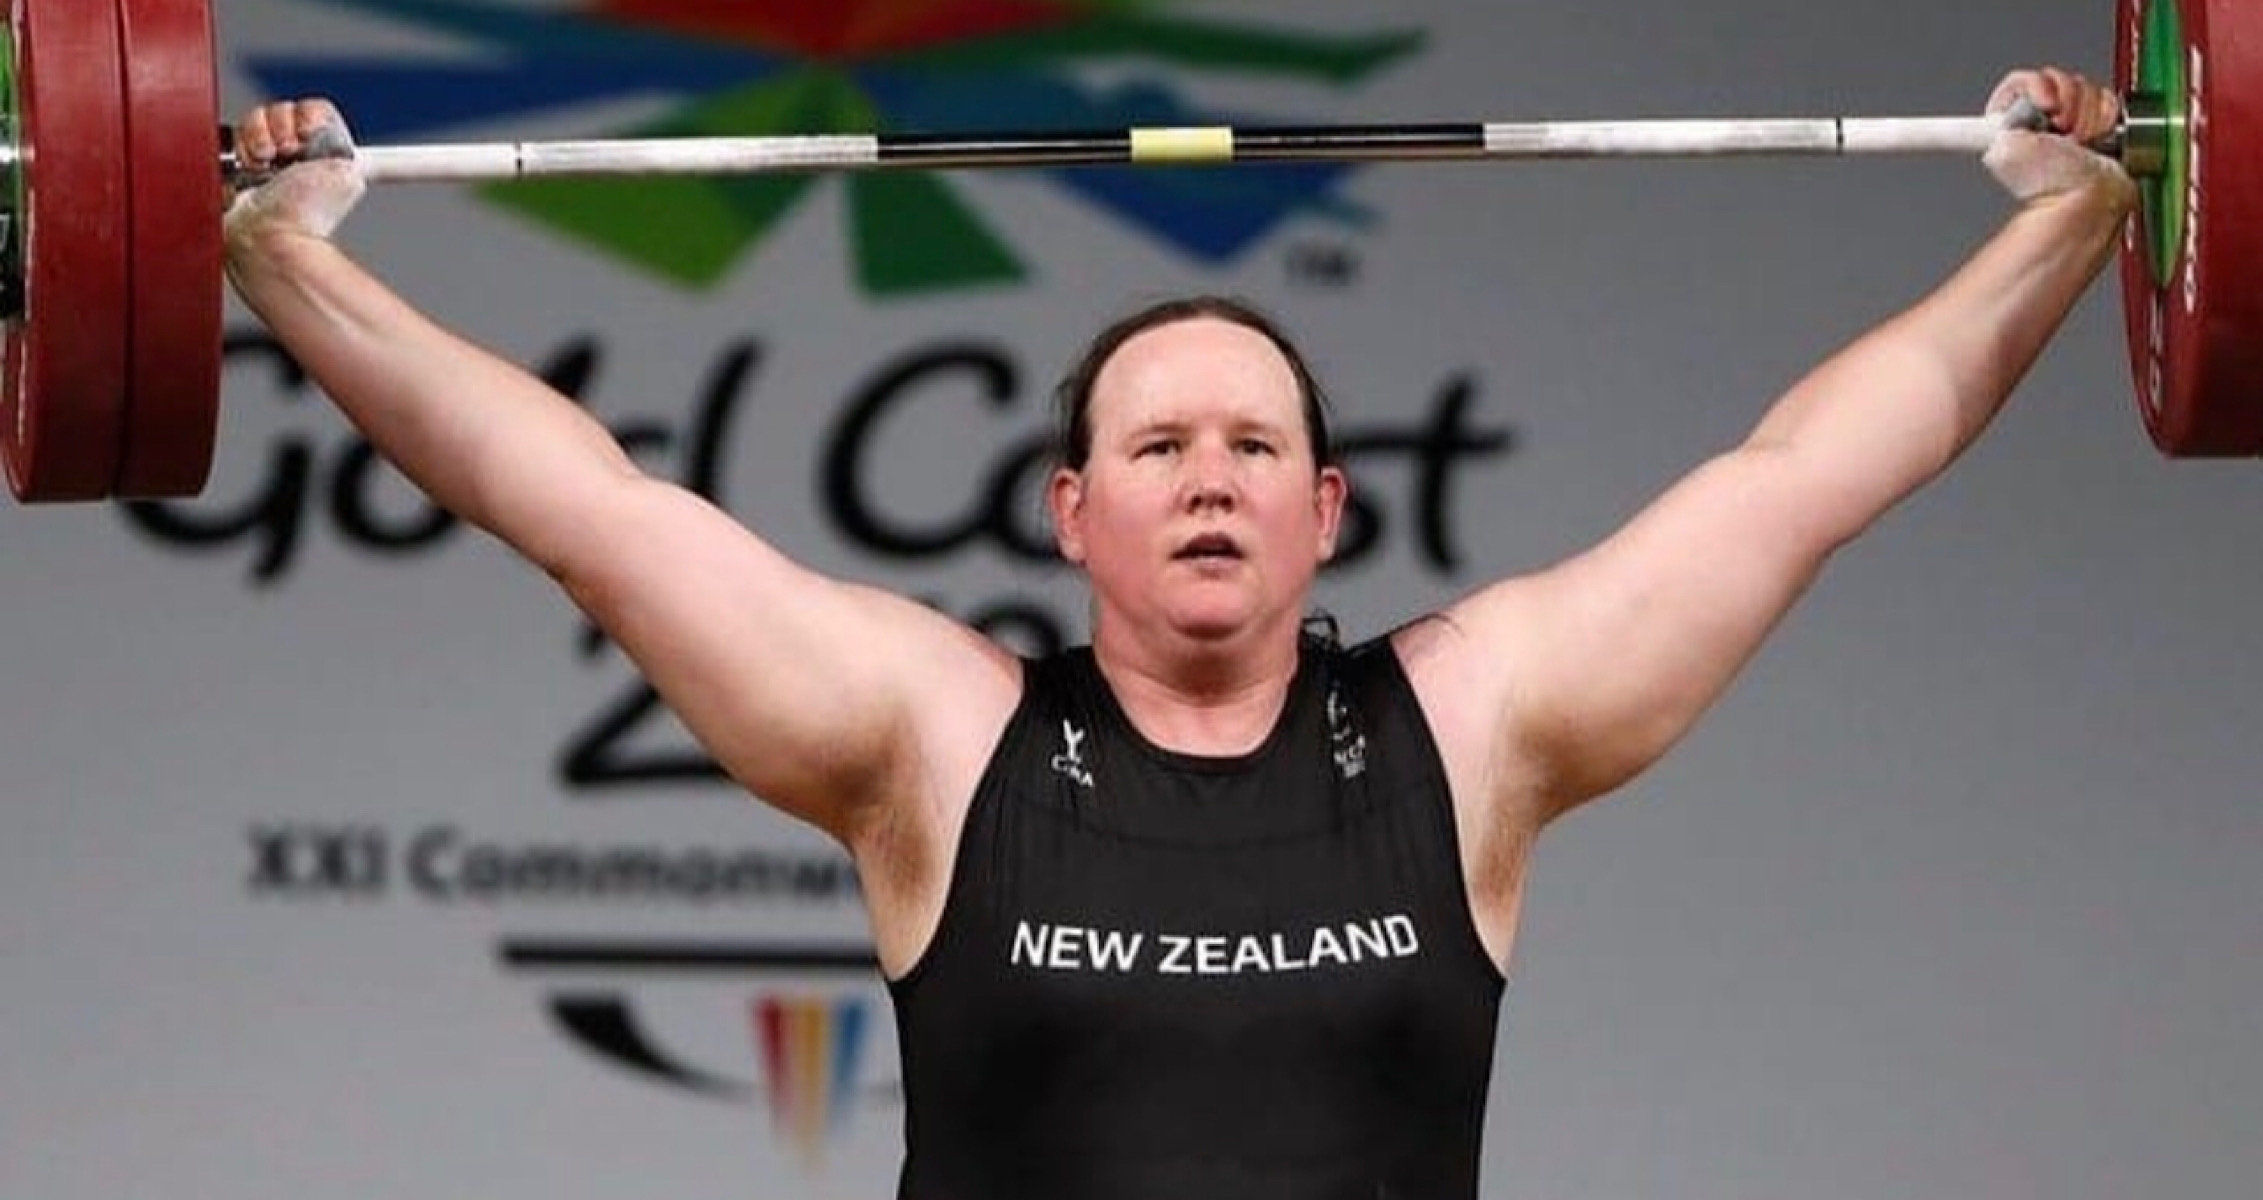 Laurel Hubbard Will Be The First Transgender Athlete to Compete at Tokyo Olympics